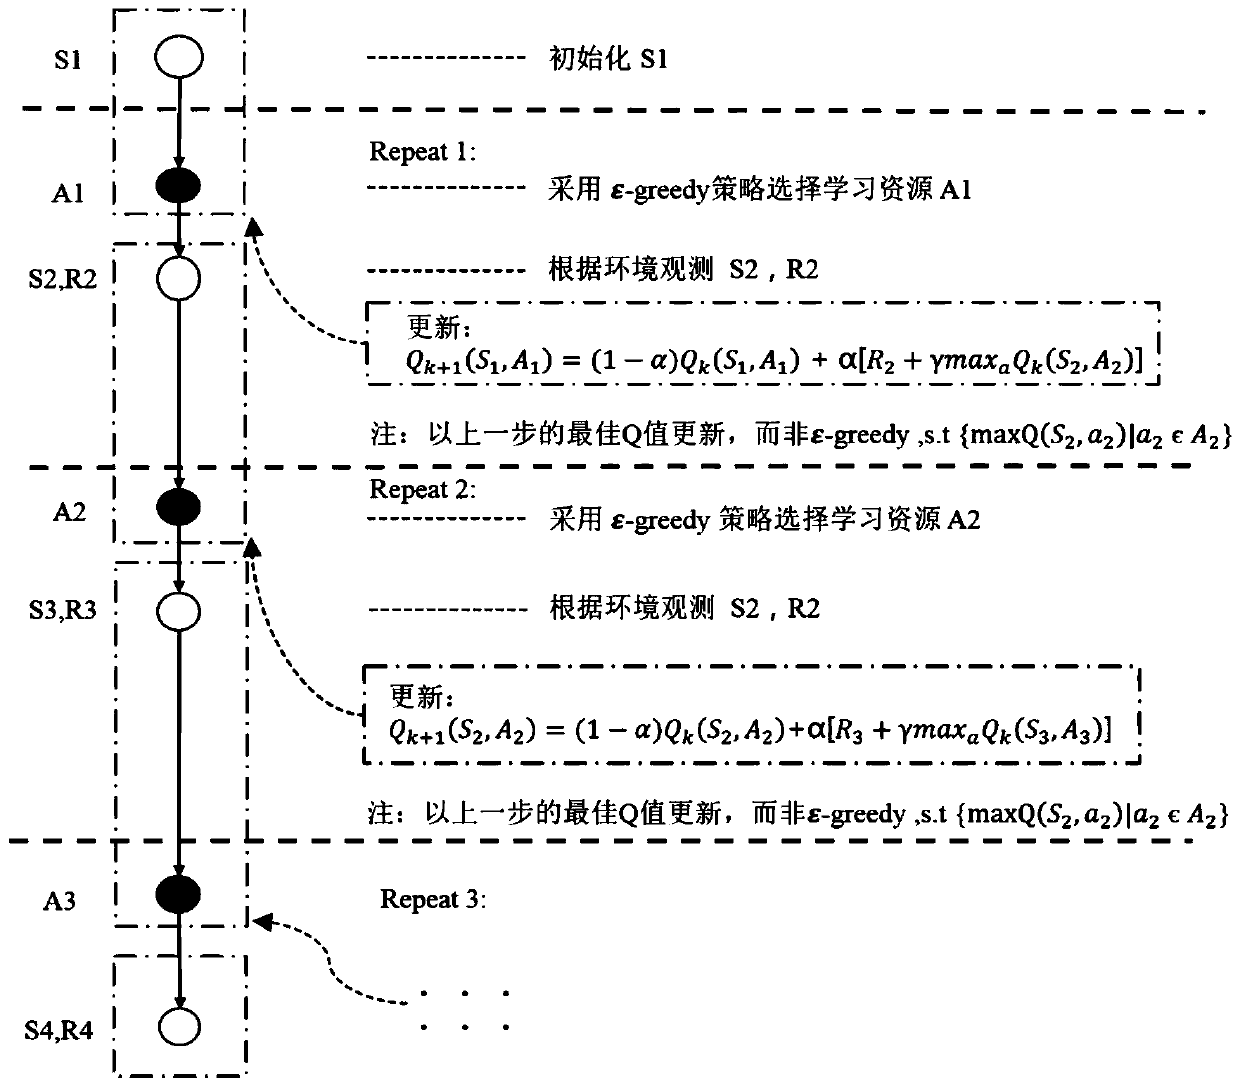 A self-adaptive learning path planning system based on reinforcement learning